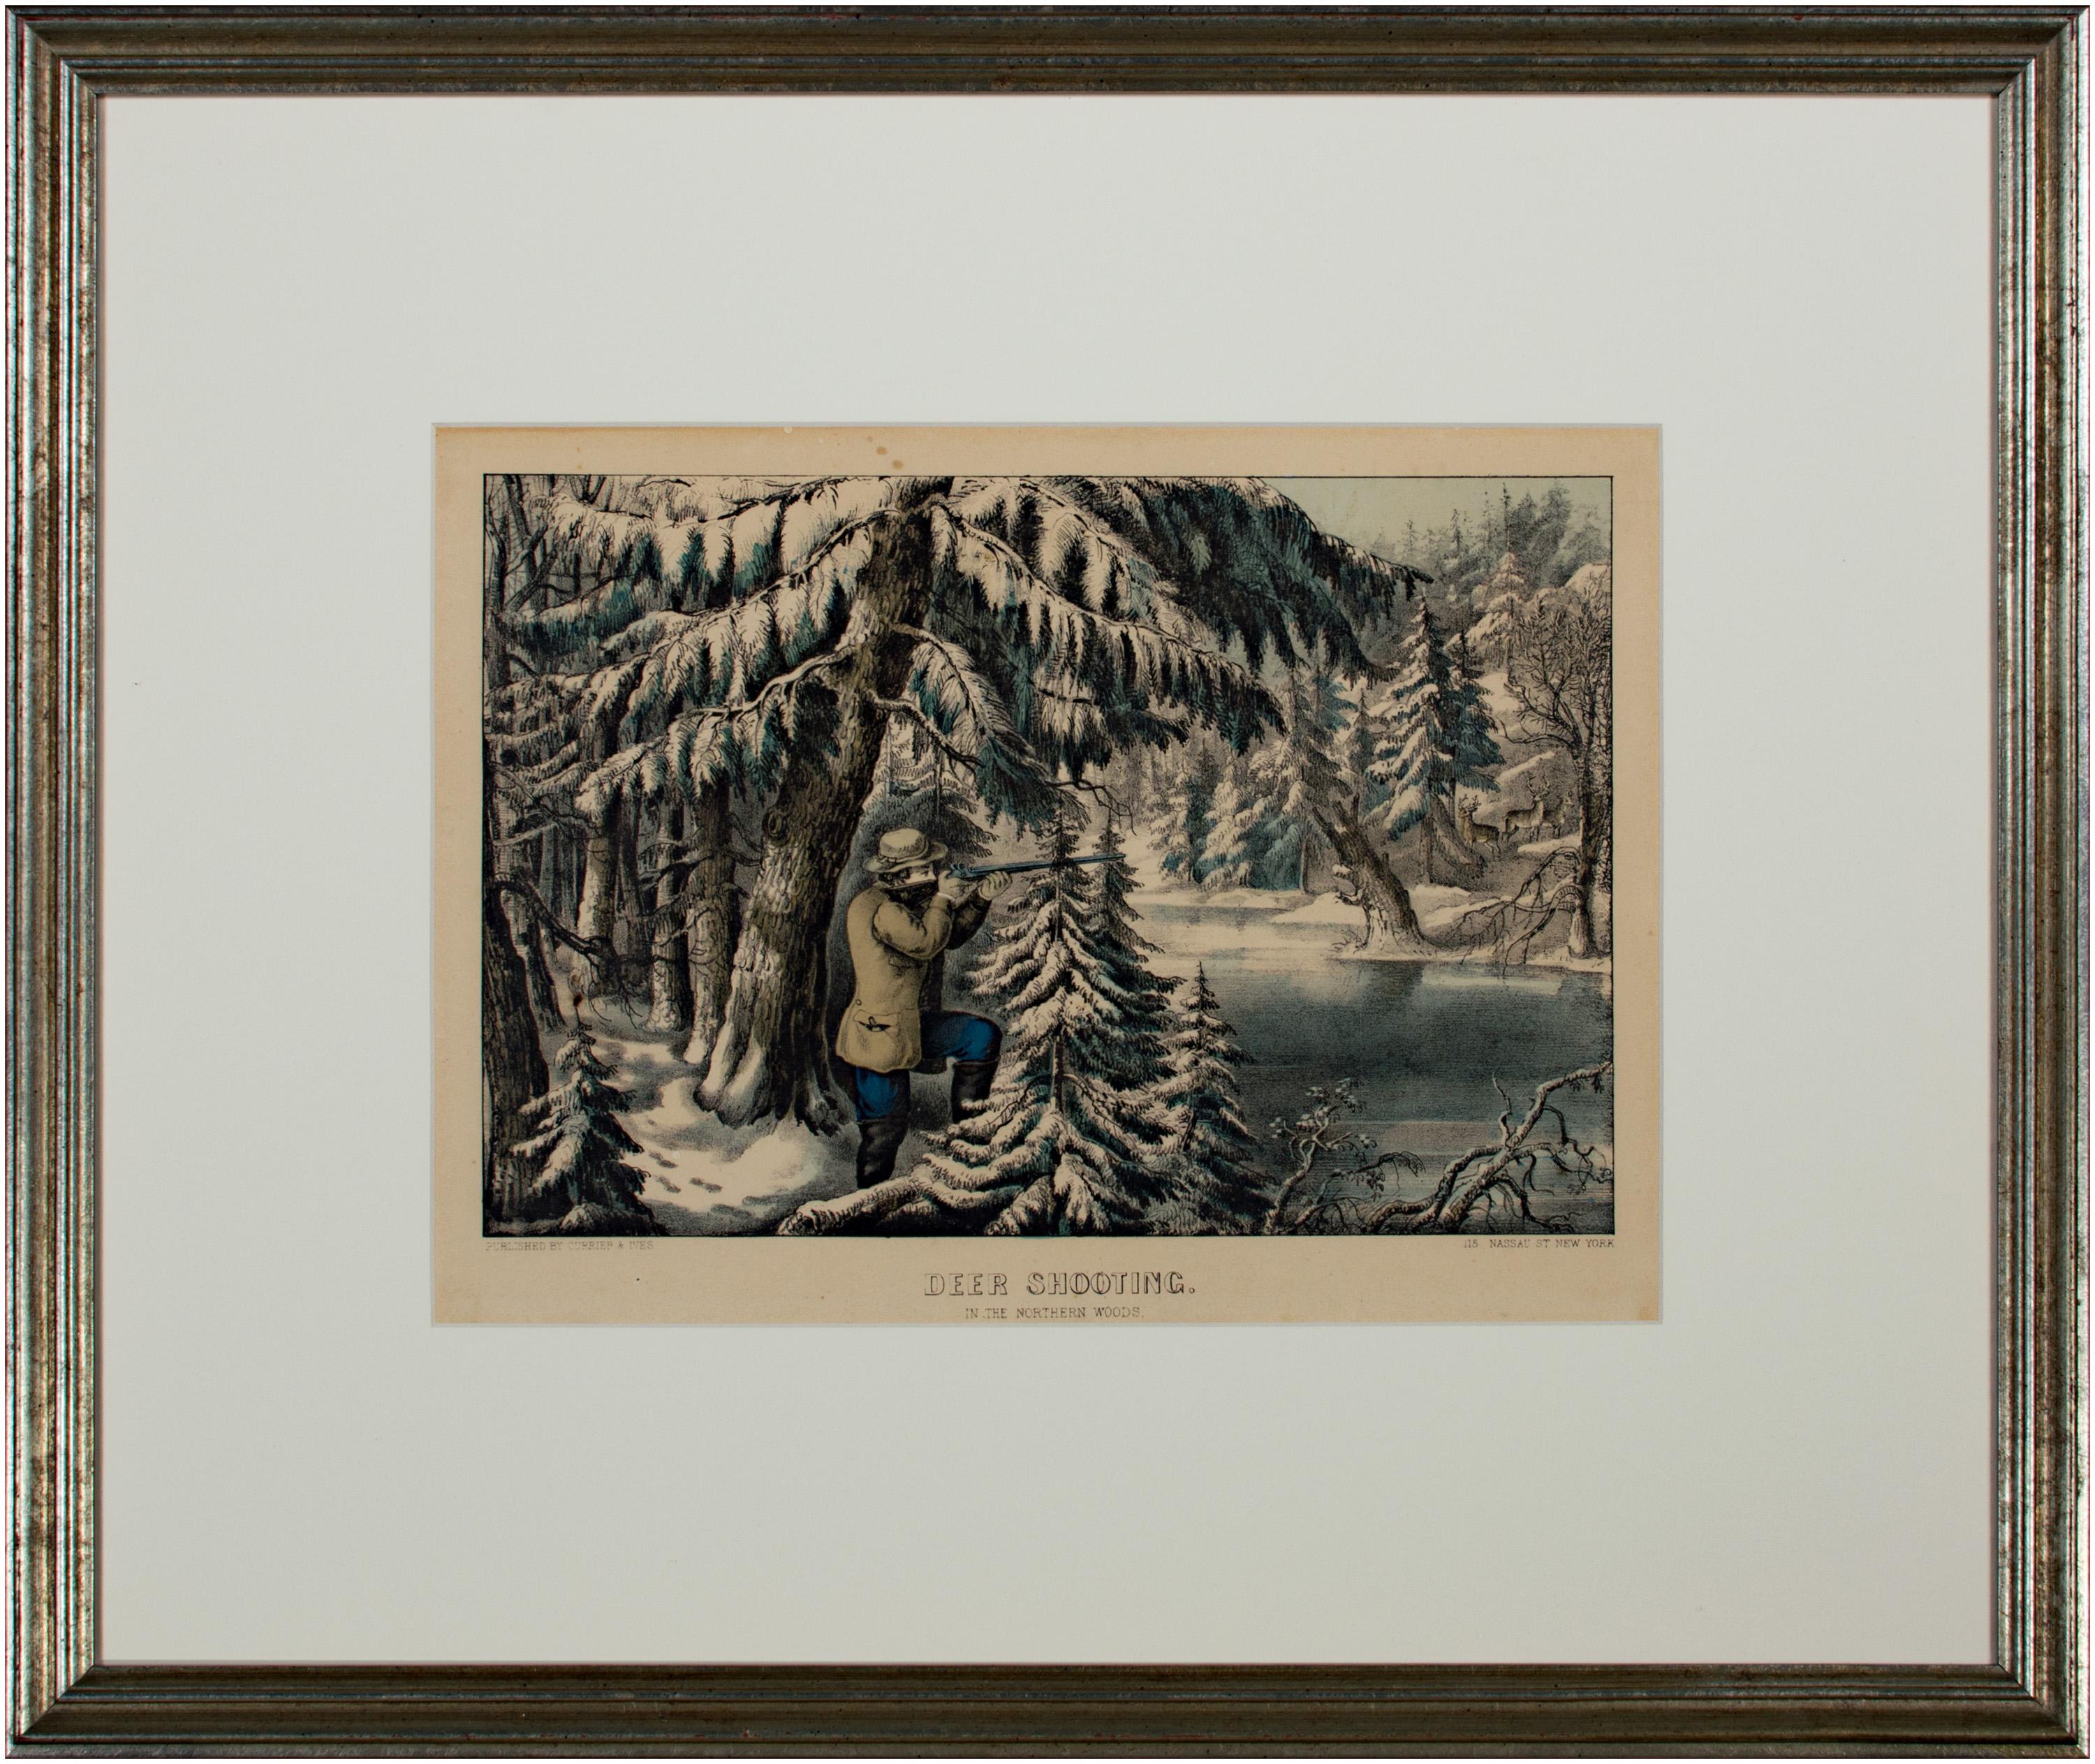 Currier & Ives Landscape Print - "Deer Shooting in the Northern Woods, " Hand-colored Lithograph 